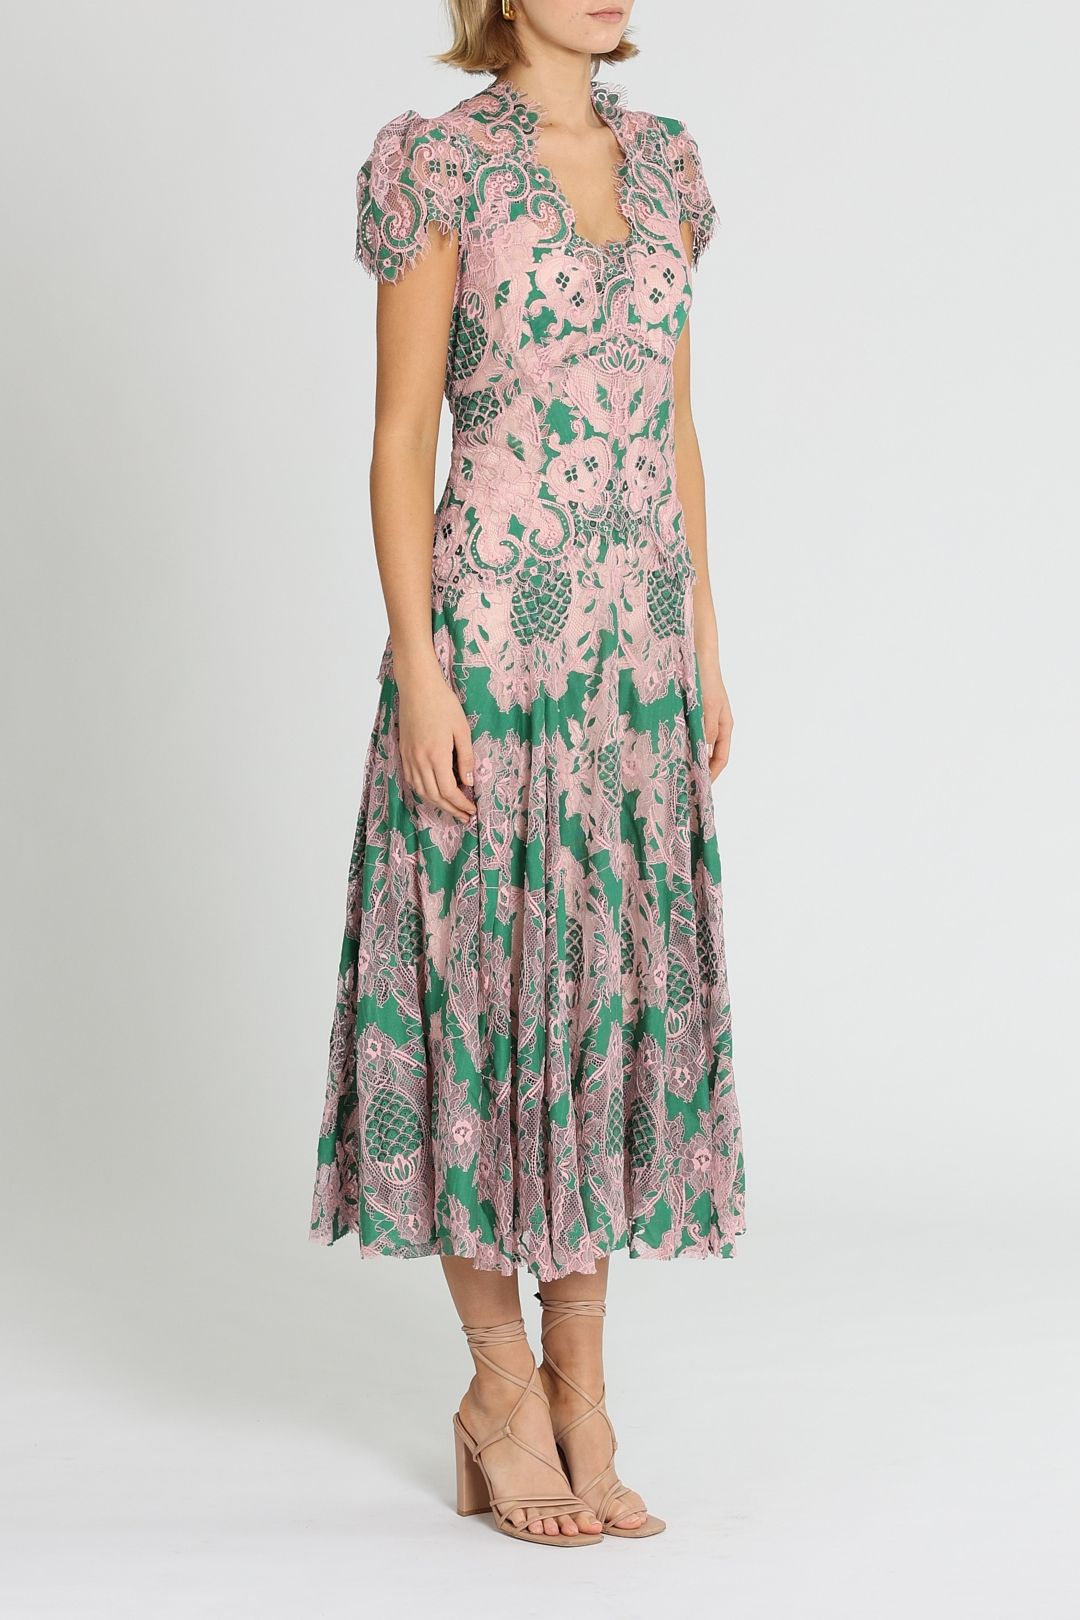 Moss And Spy Sienna Cap Sleeve Dress Lace